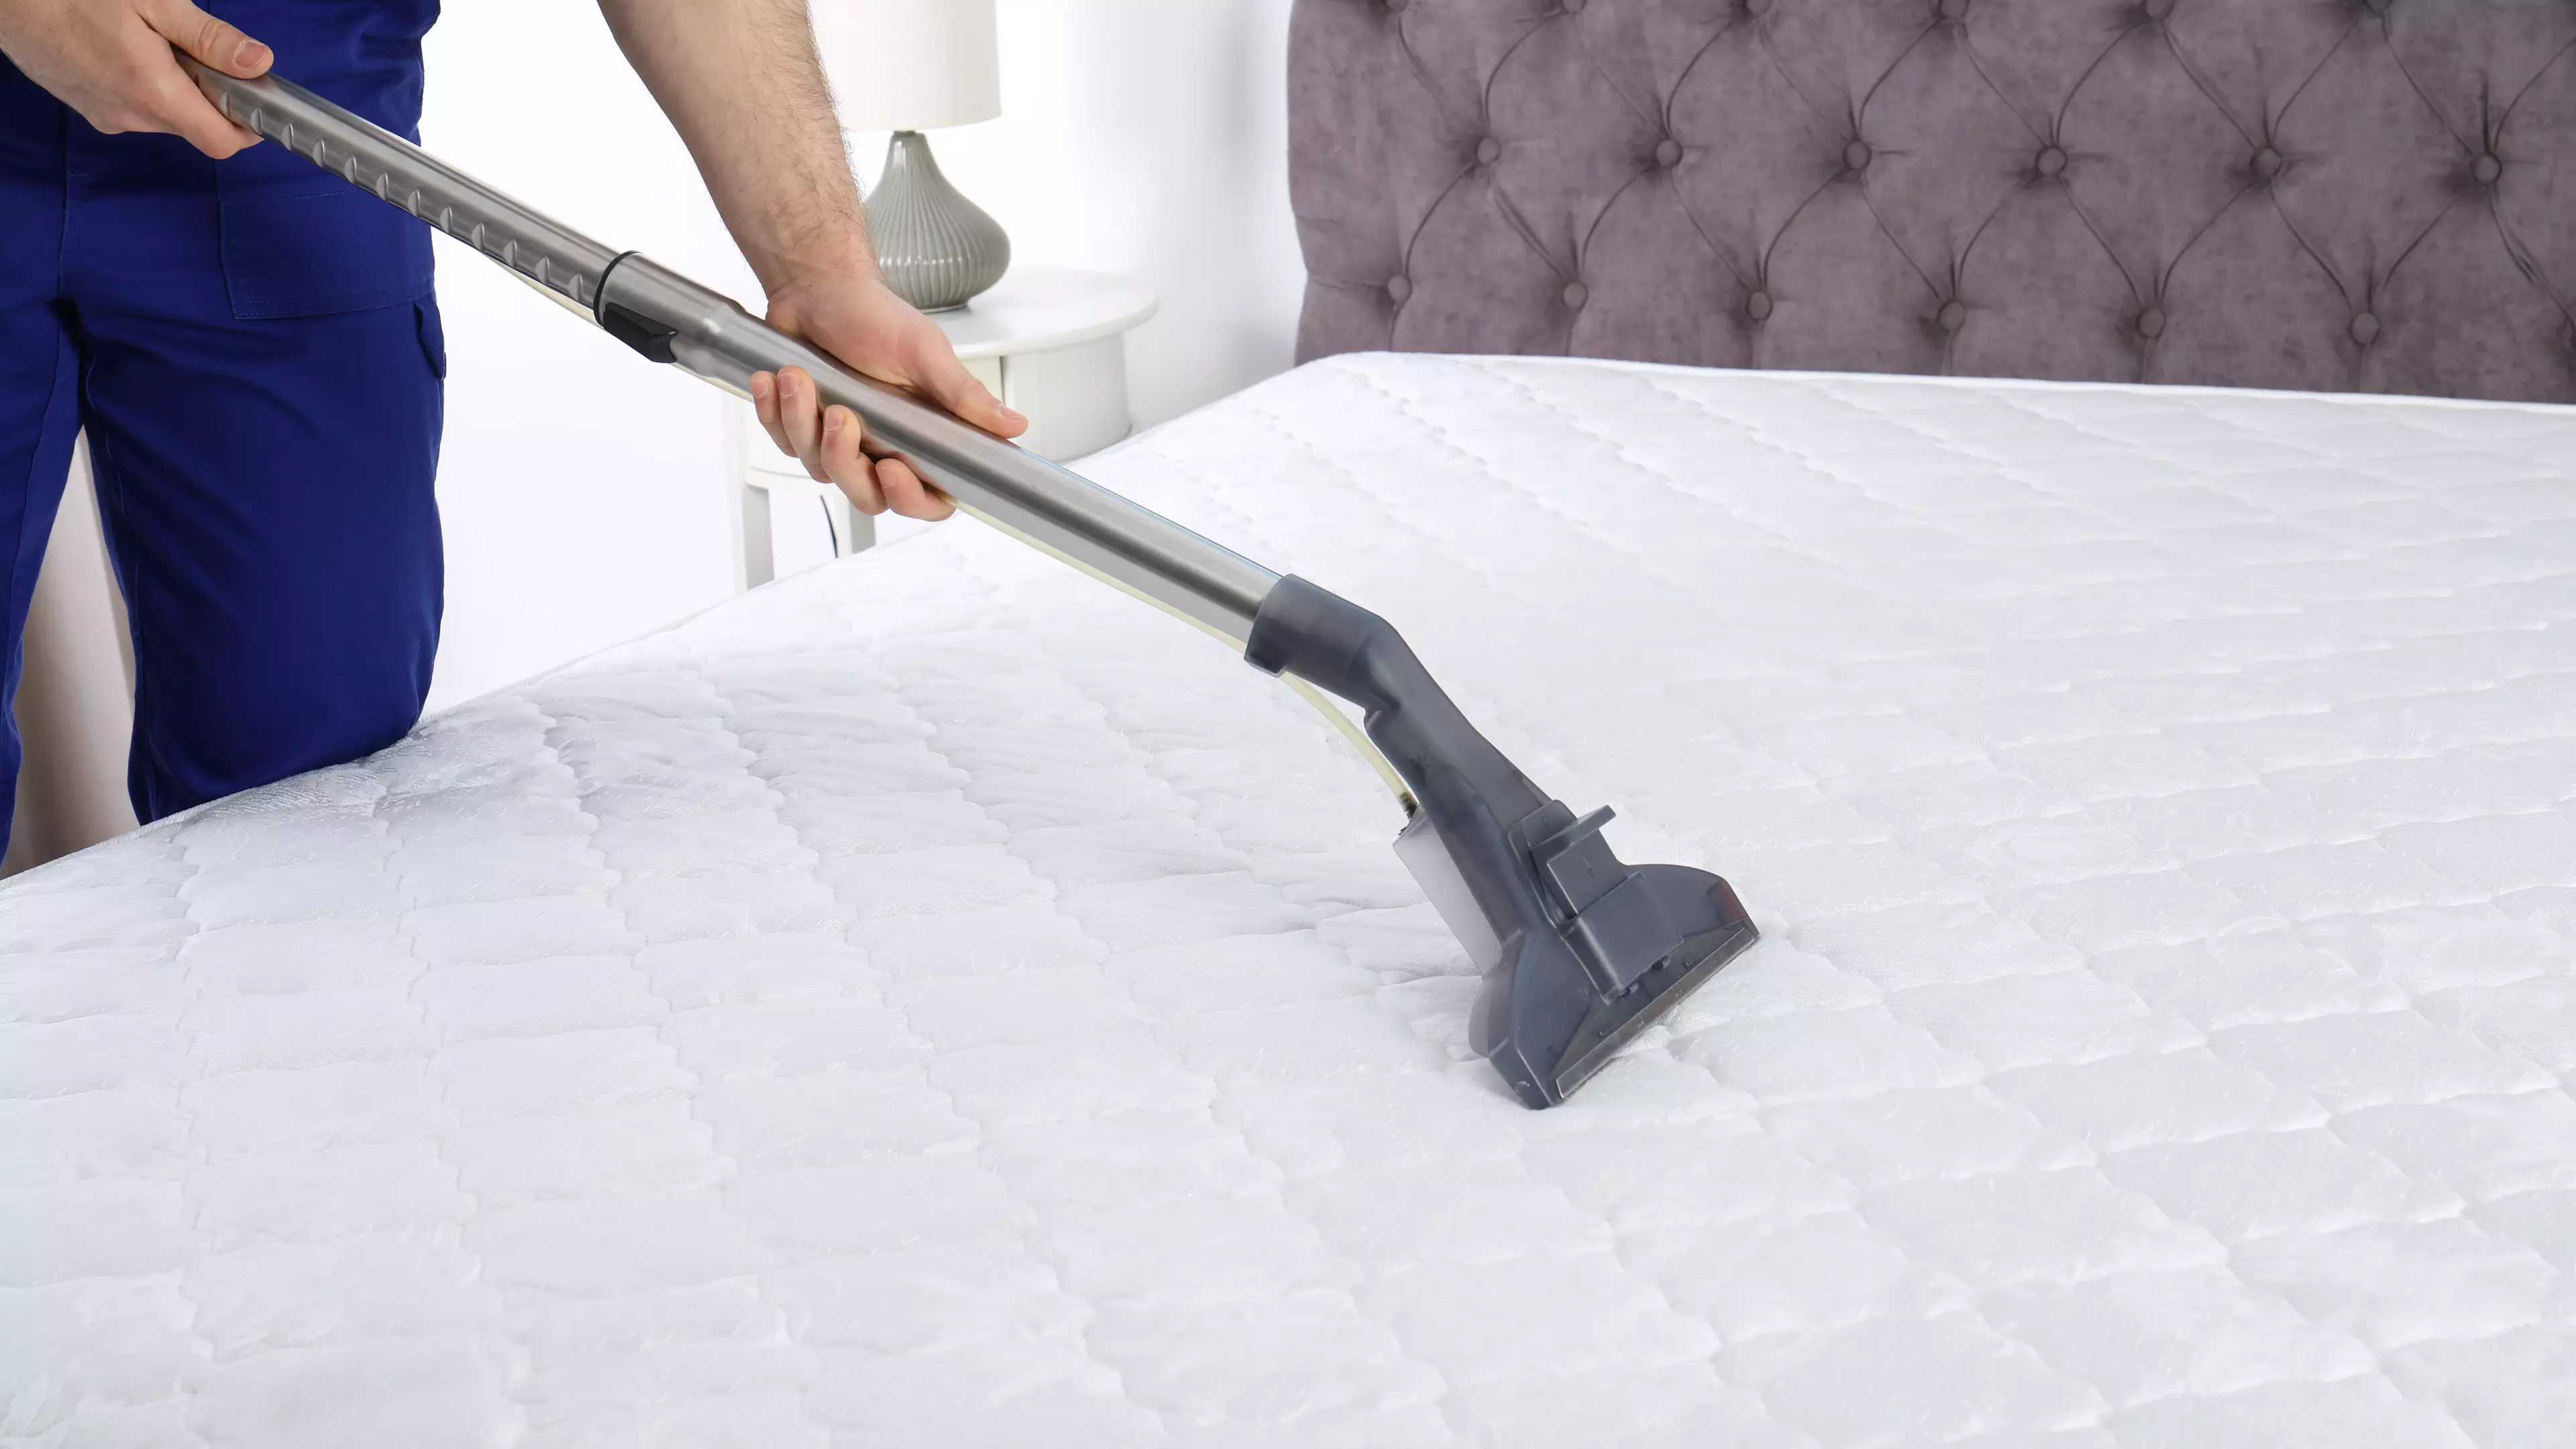 Mattresses Need To Be Vacuumed Every Six Months To Pull Out Skin Cells